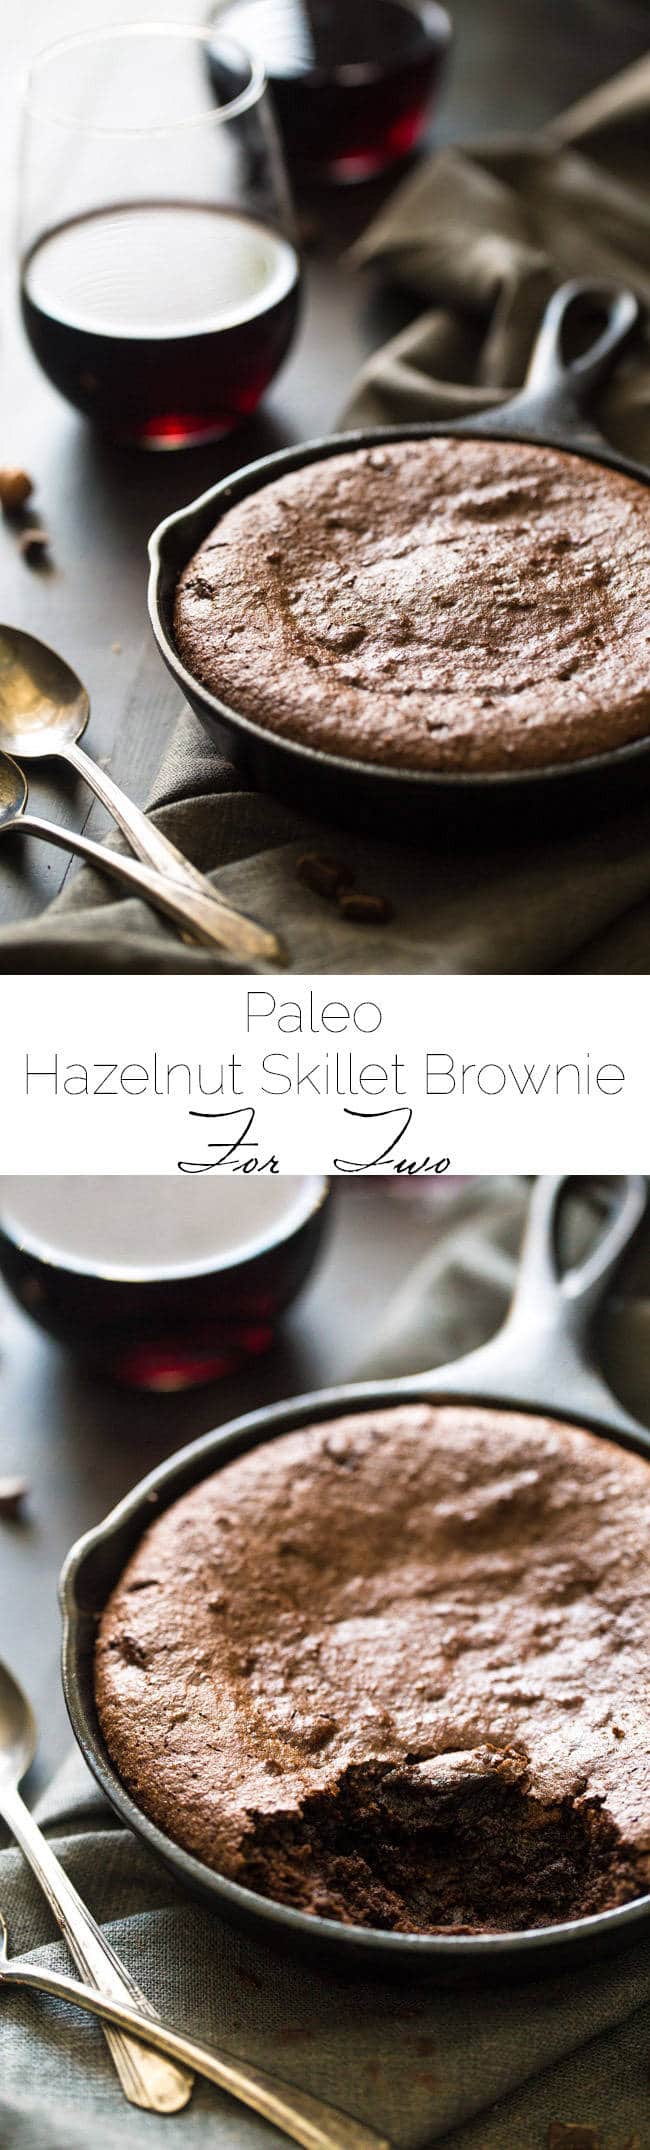 Hazelnut Paleo Brownies for Two - Ultra rich and fudgy you would never know these are gluten free and healthy! So easy and ready in under 30 mins! | Foodfaithfitness.com | @FoodFaithFit